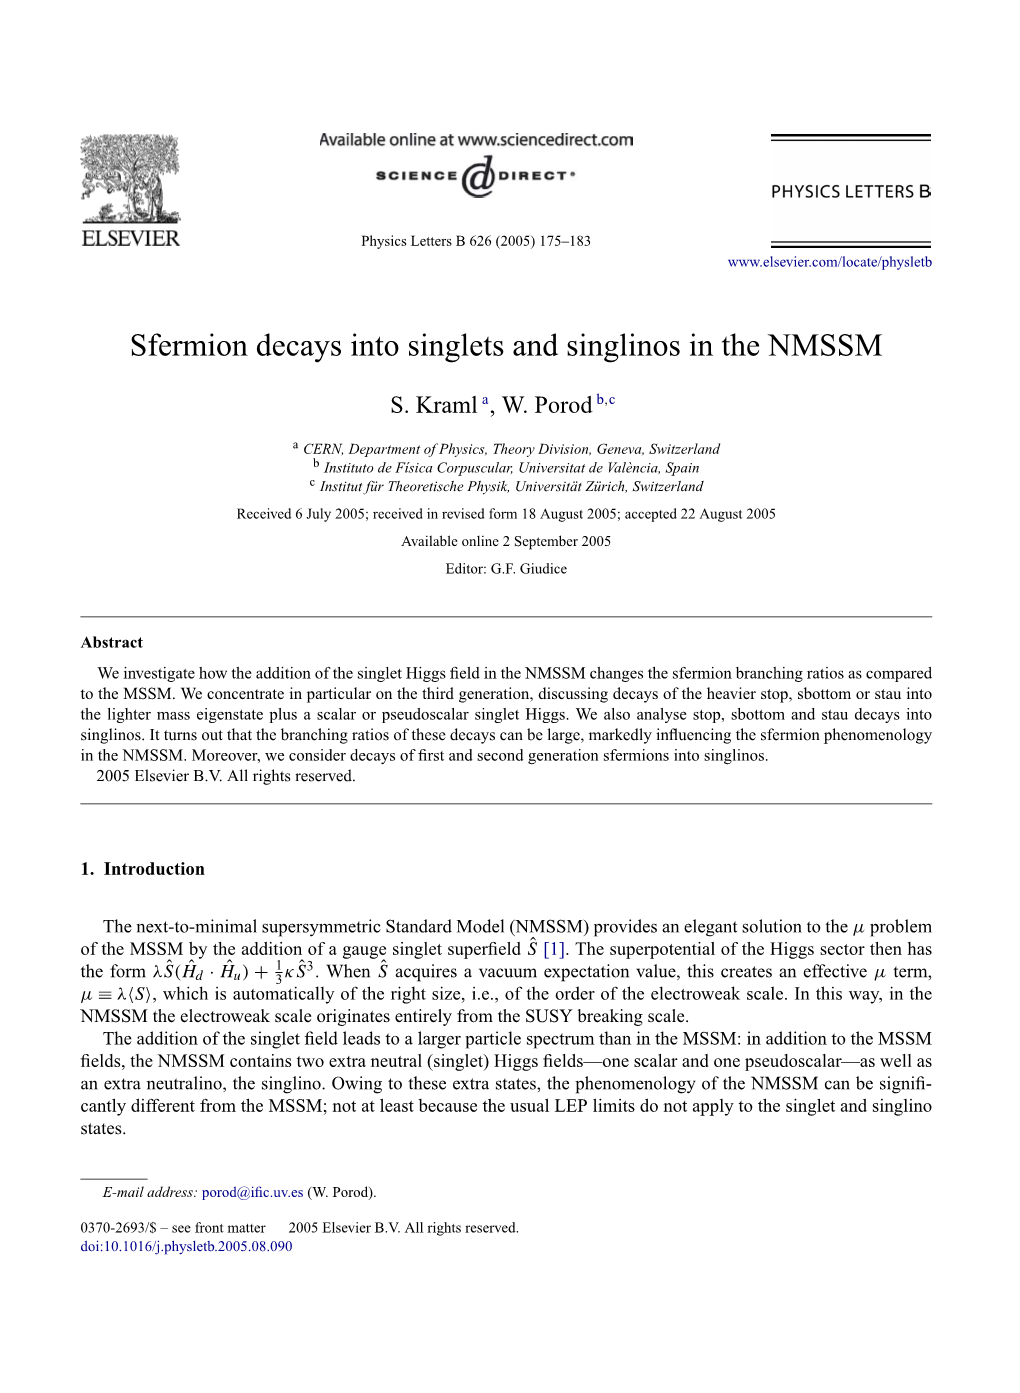 Sfermion Decays Into Singlets and Singlinos in the NMSSM